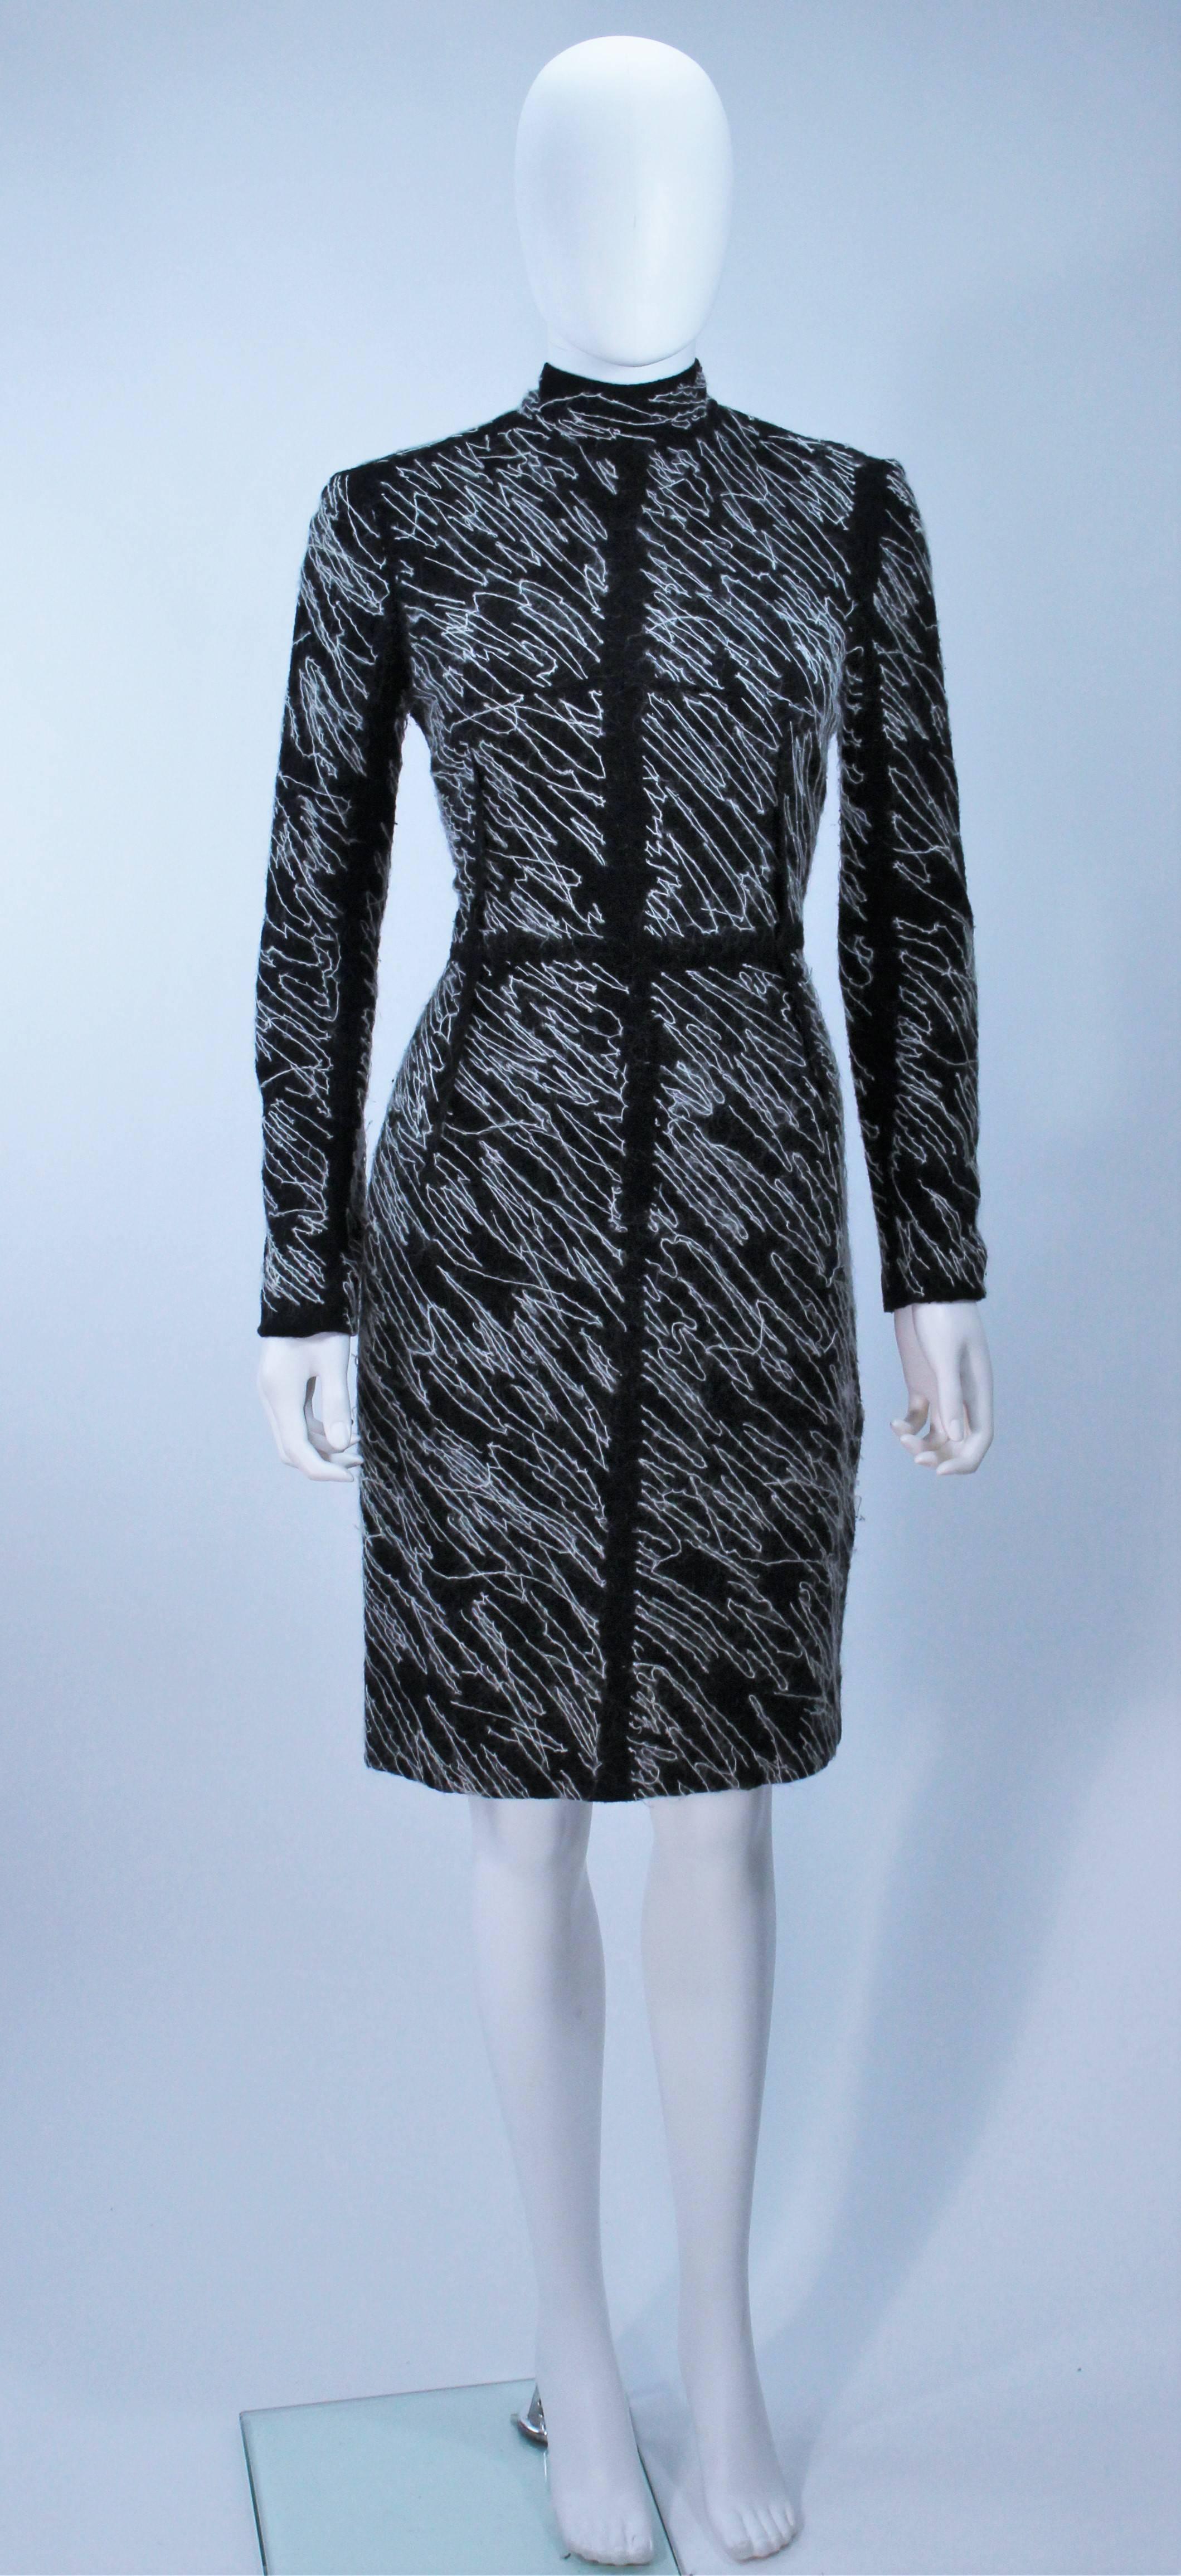  This Proenze Schouler  cocktail dress is composed of a black wool with a white wool thread in an abstract pattern. There is a center back zipper closure. In excellent vintage condition. 

Measures (Approximately)
Length: 38.5